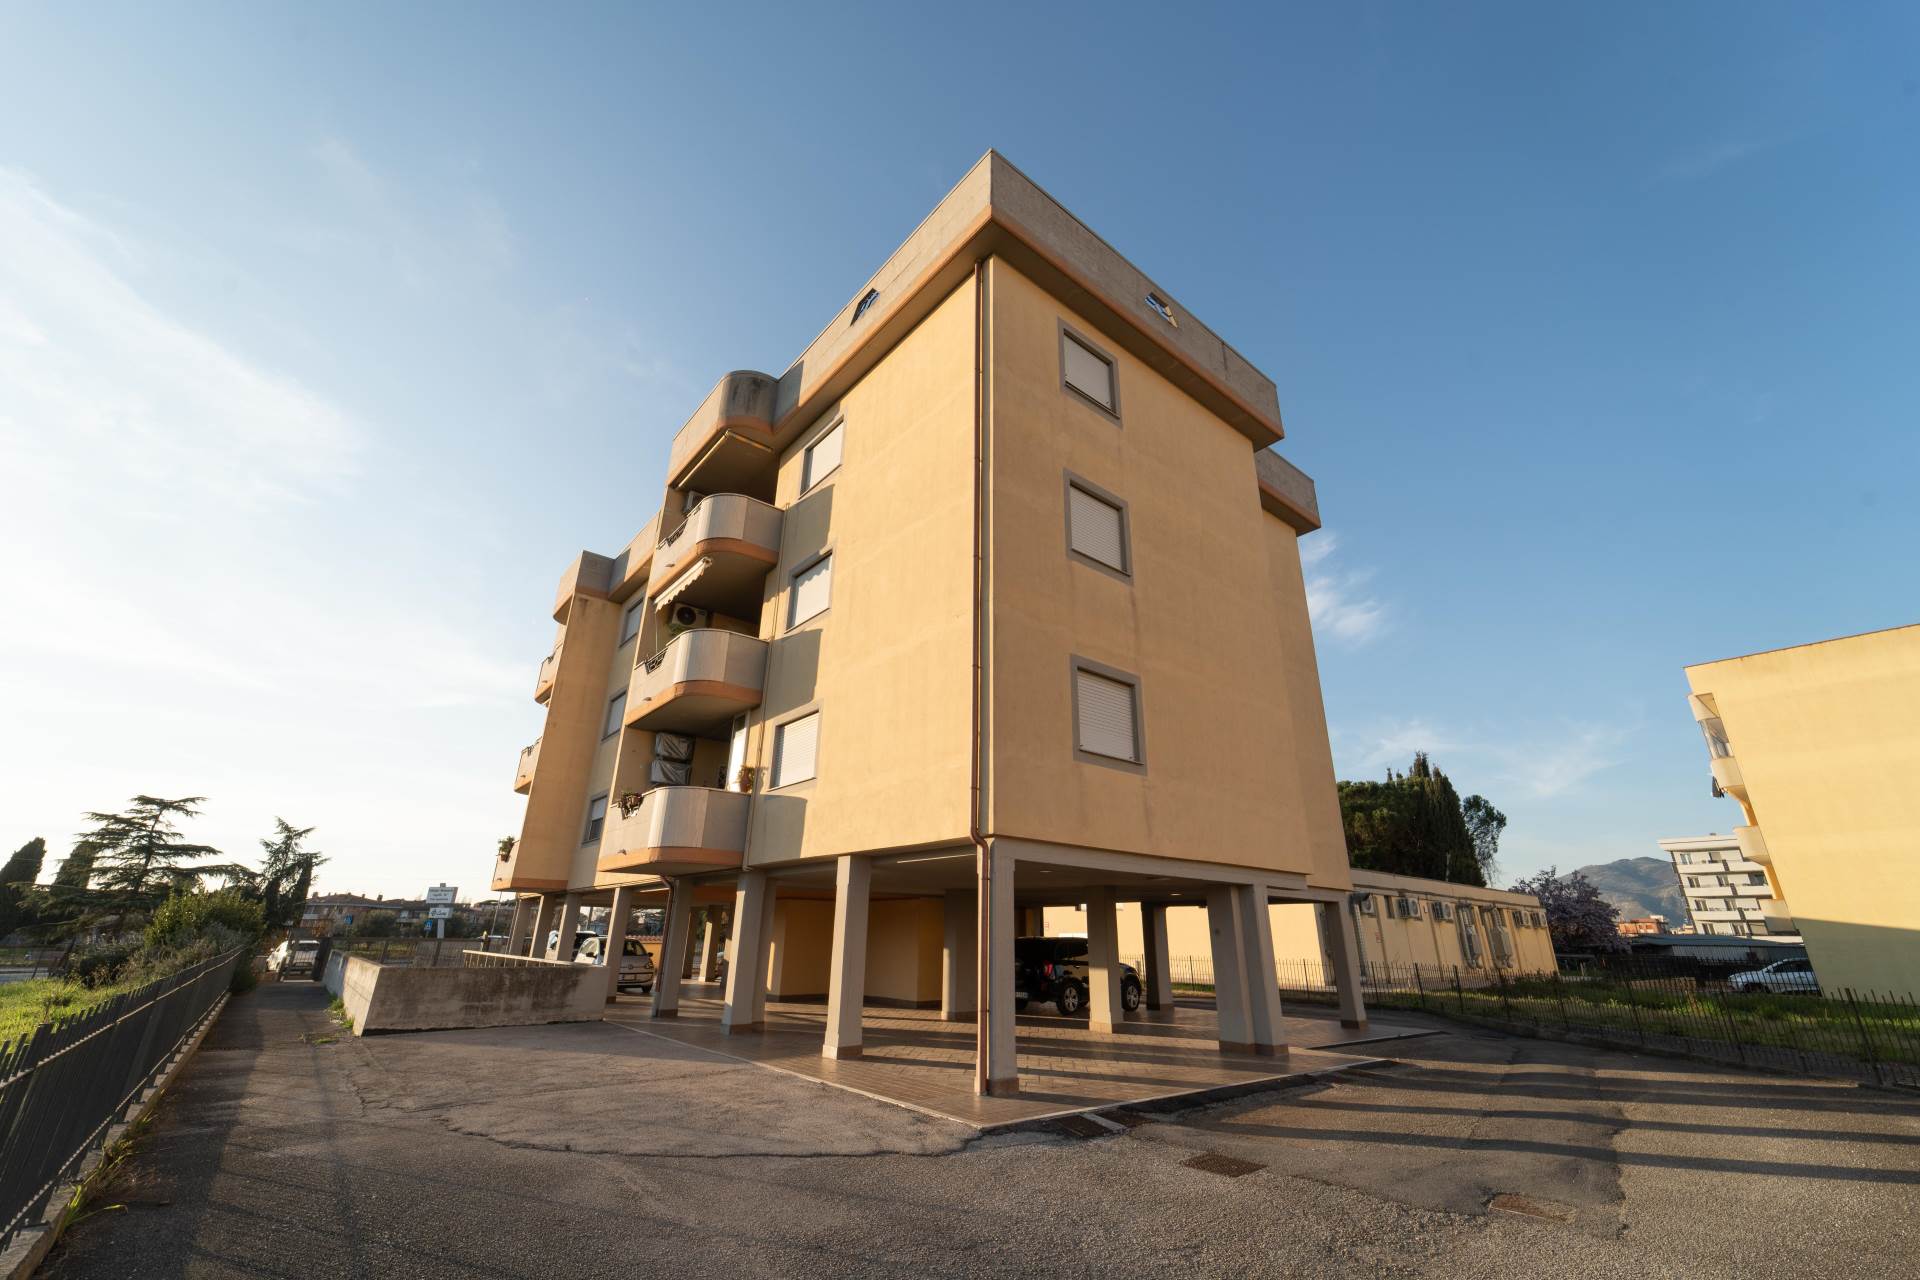 LATINA SCALO, LATINA, Apartment for sale of 107 Sq. mt., Excellent Condition, Heating Individual heating system, placed at 3° on 4, composed by: 7 